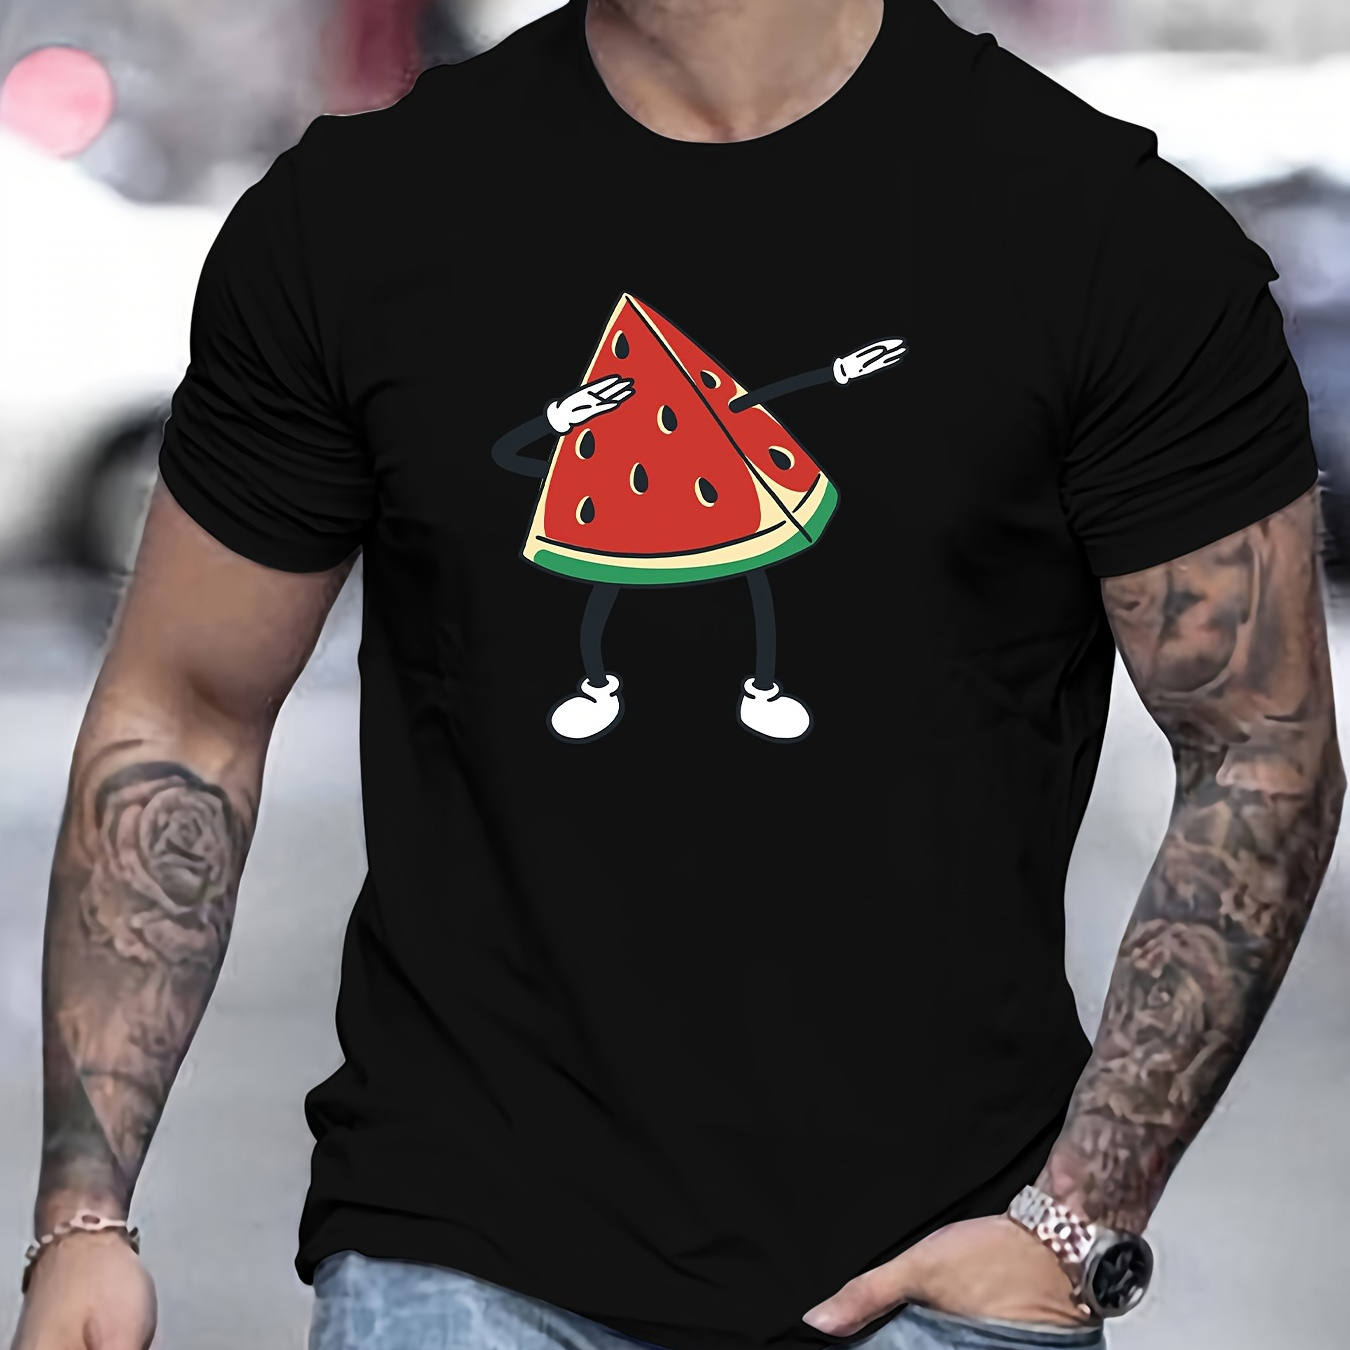 

Watermelon Dancing Print, Men's Round Crew Neck Short Sleeve, Simple Style Tee Fashion Regular Fit T-shirt, Casual Comfy Top For Spring Summer Holiday Leisure Vacation Men's Clothing As Gift